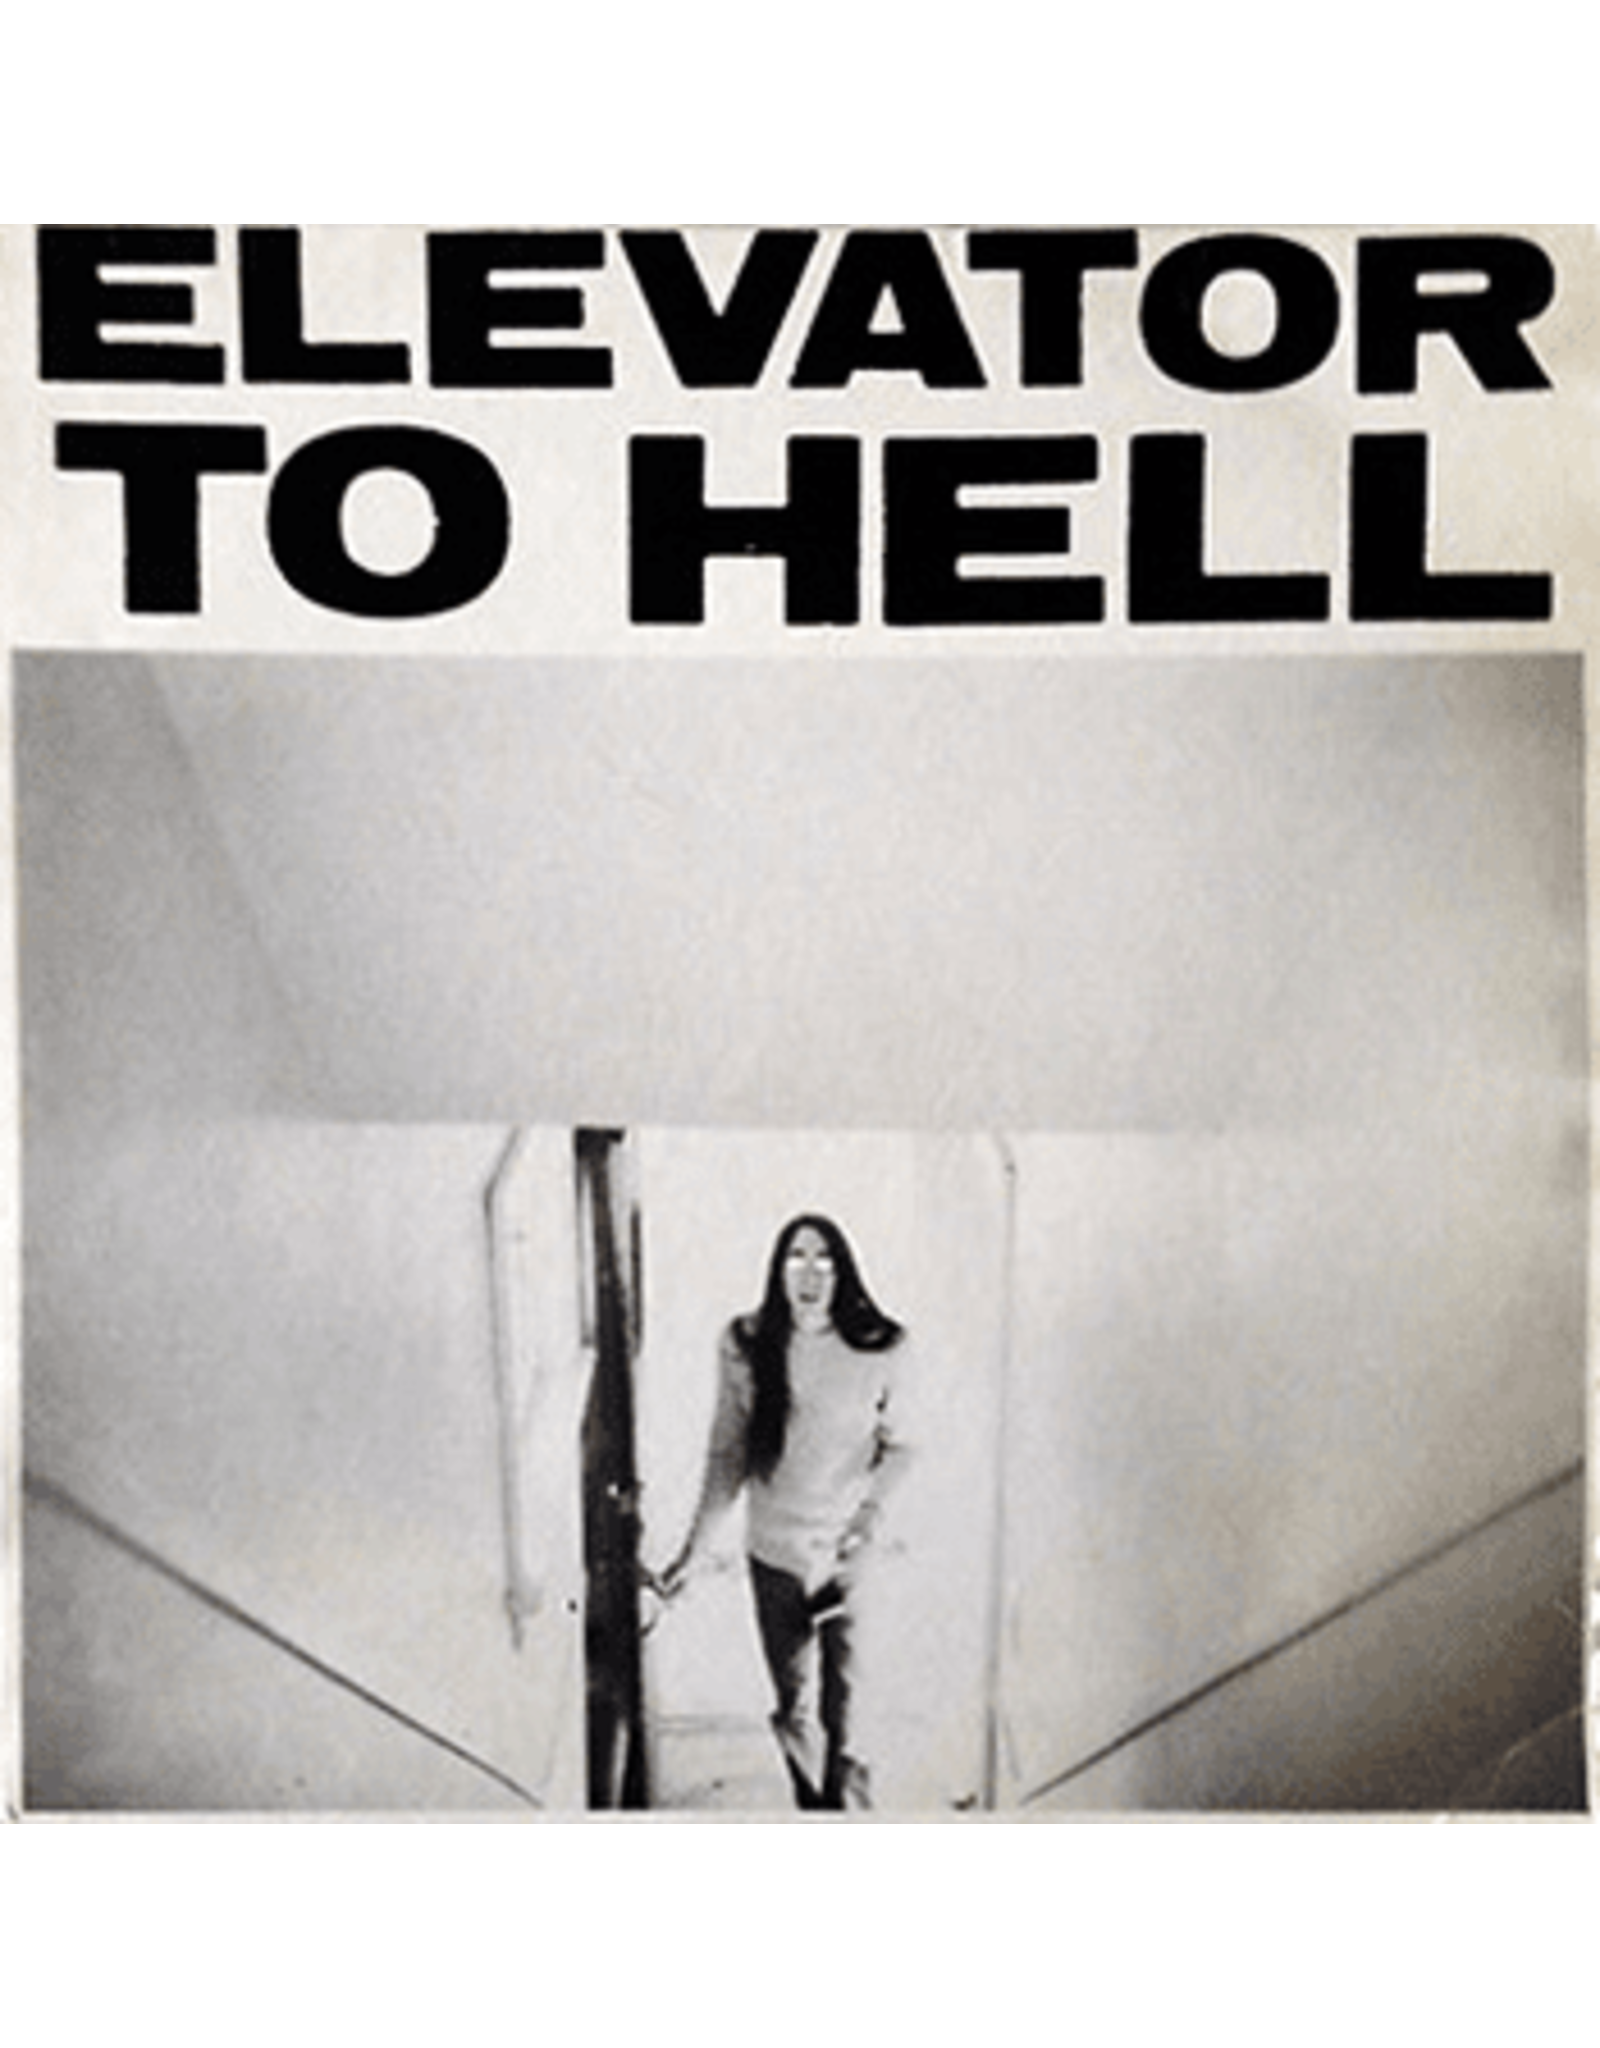 Elevator To Hell - Parts 1-3 2LP ("Extra edition")